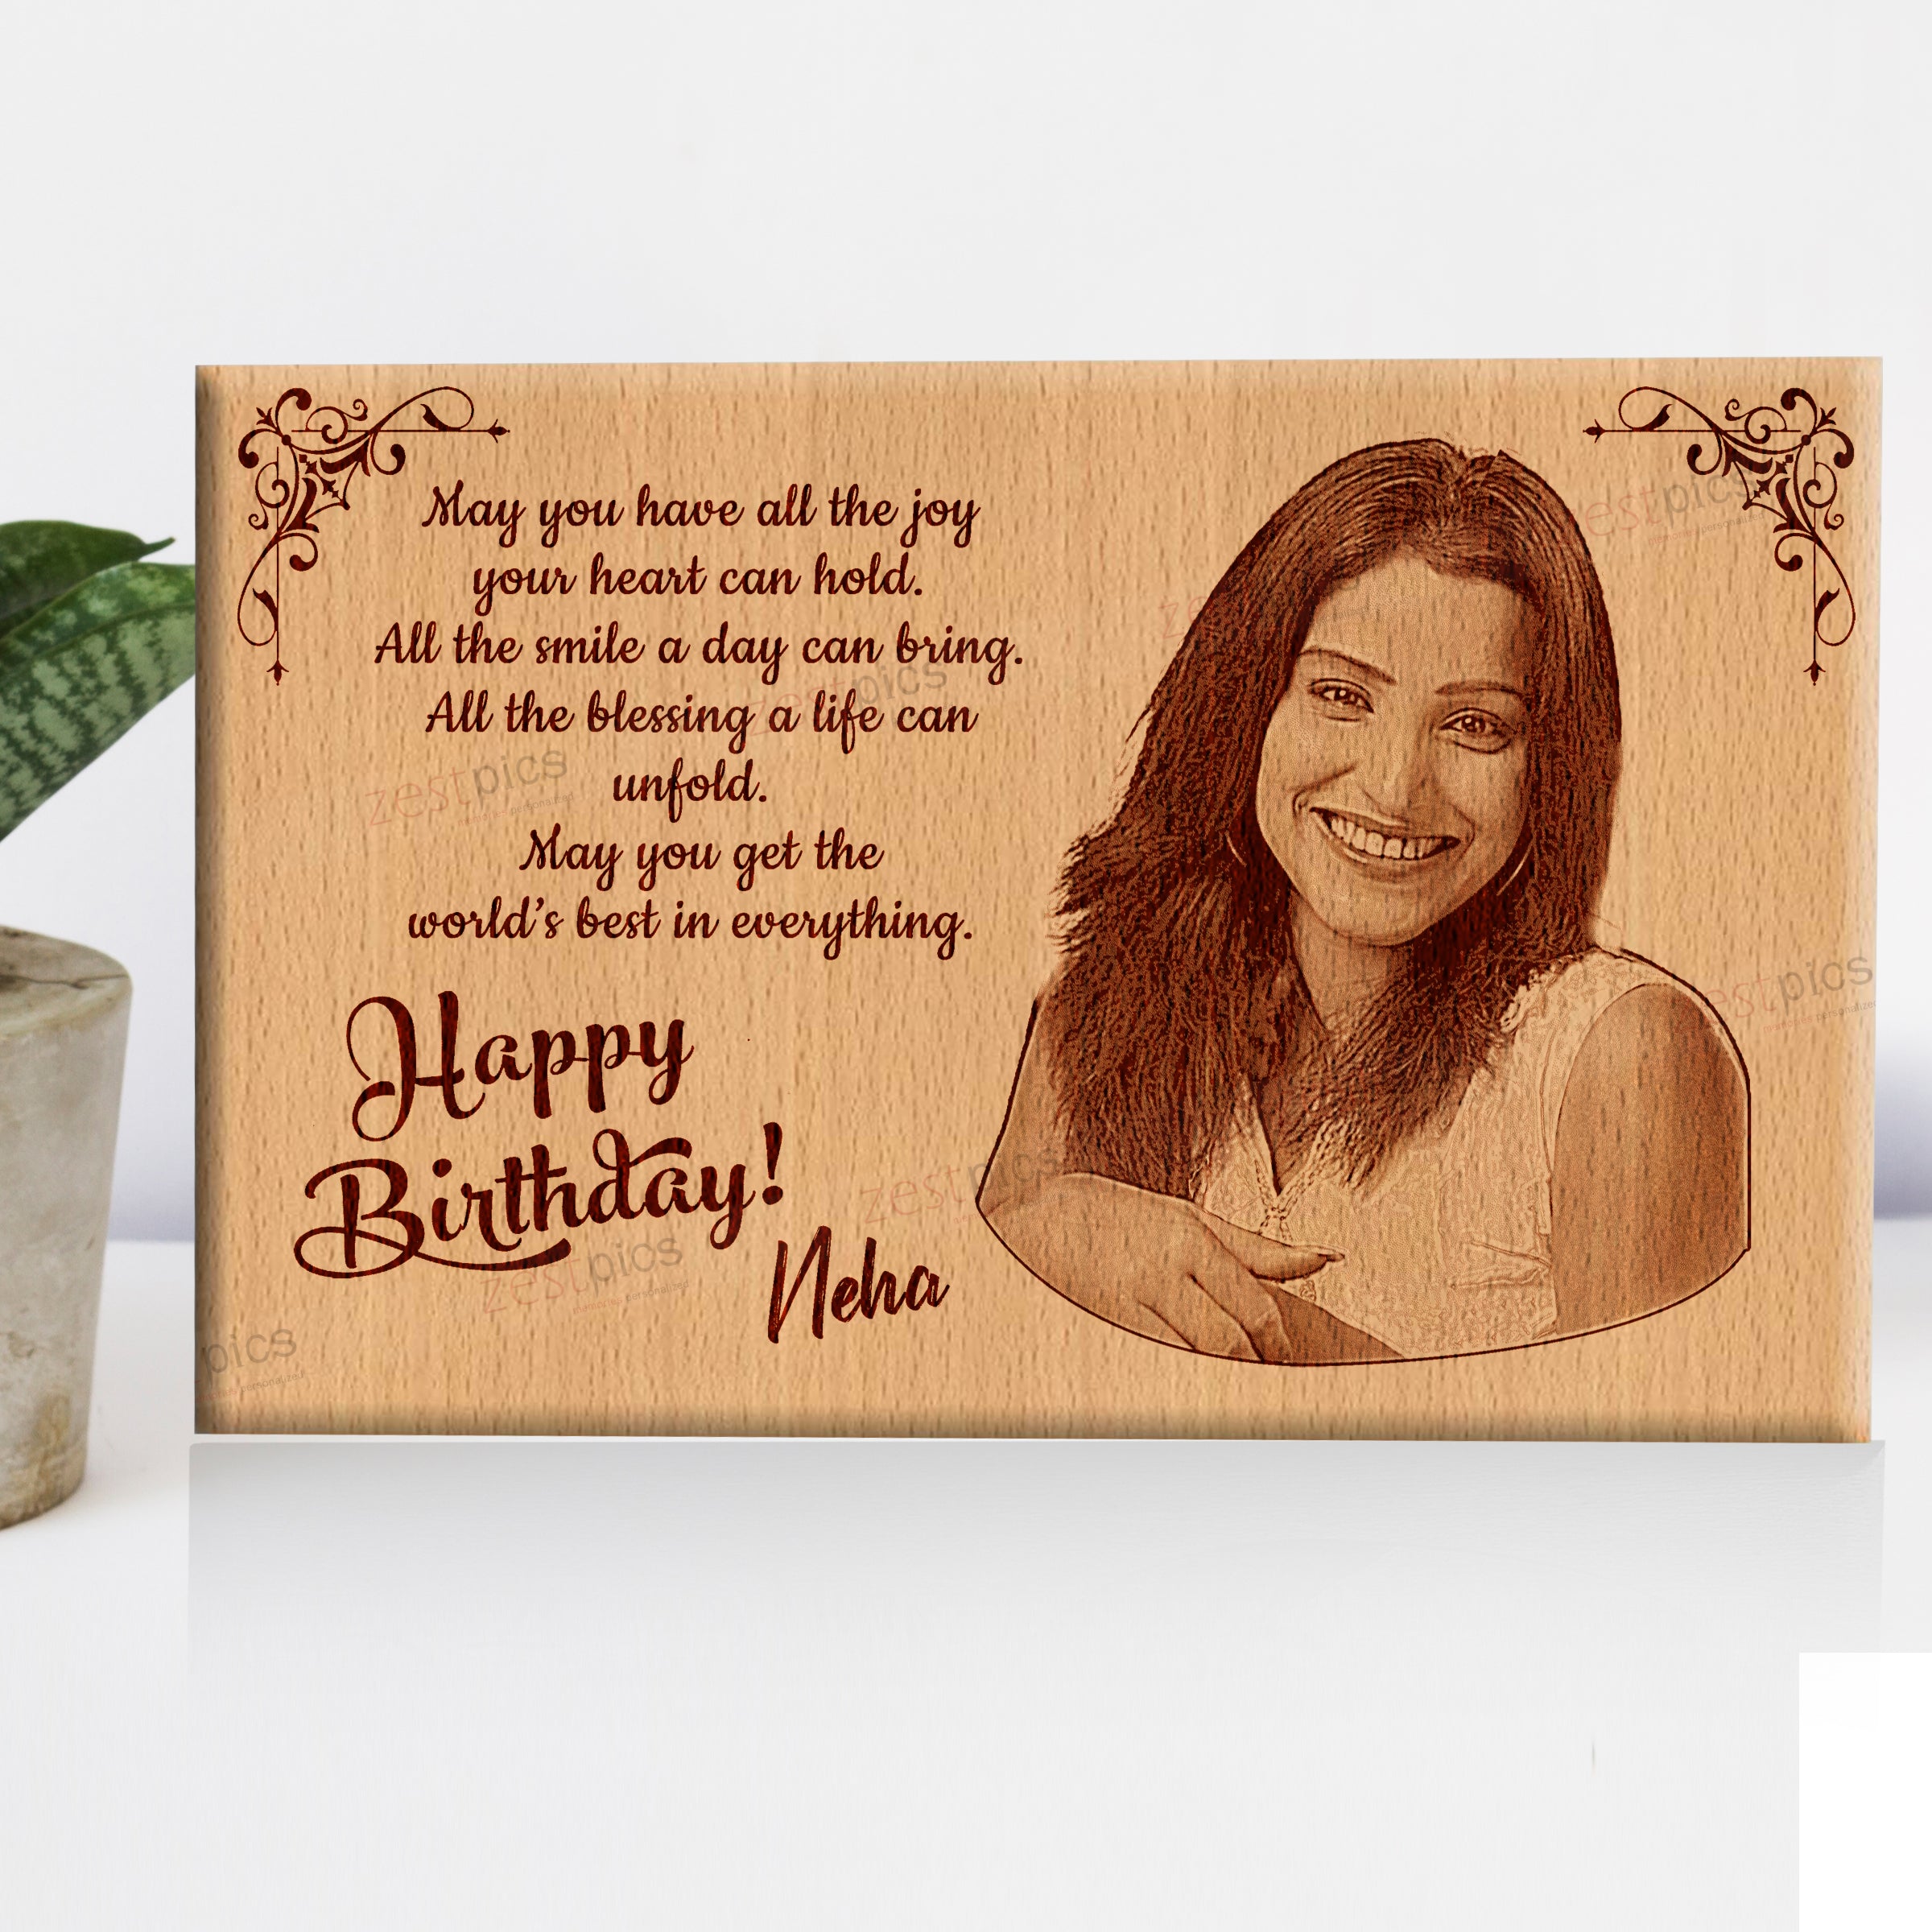 Wooden engraved photo gifts online -Presto